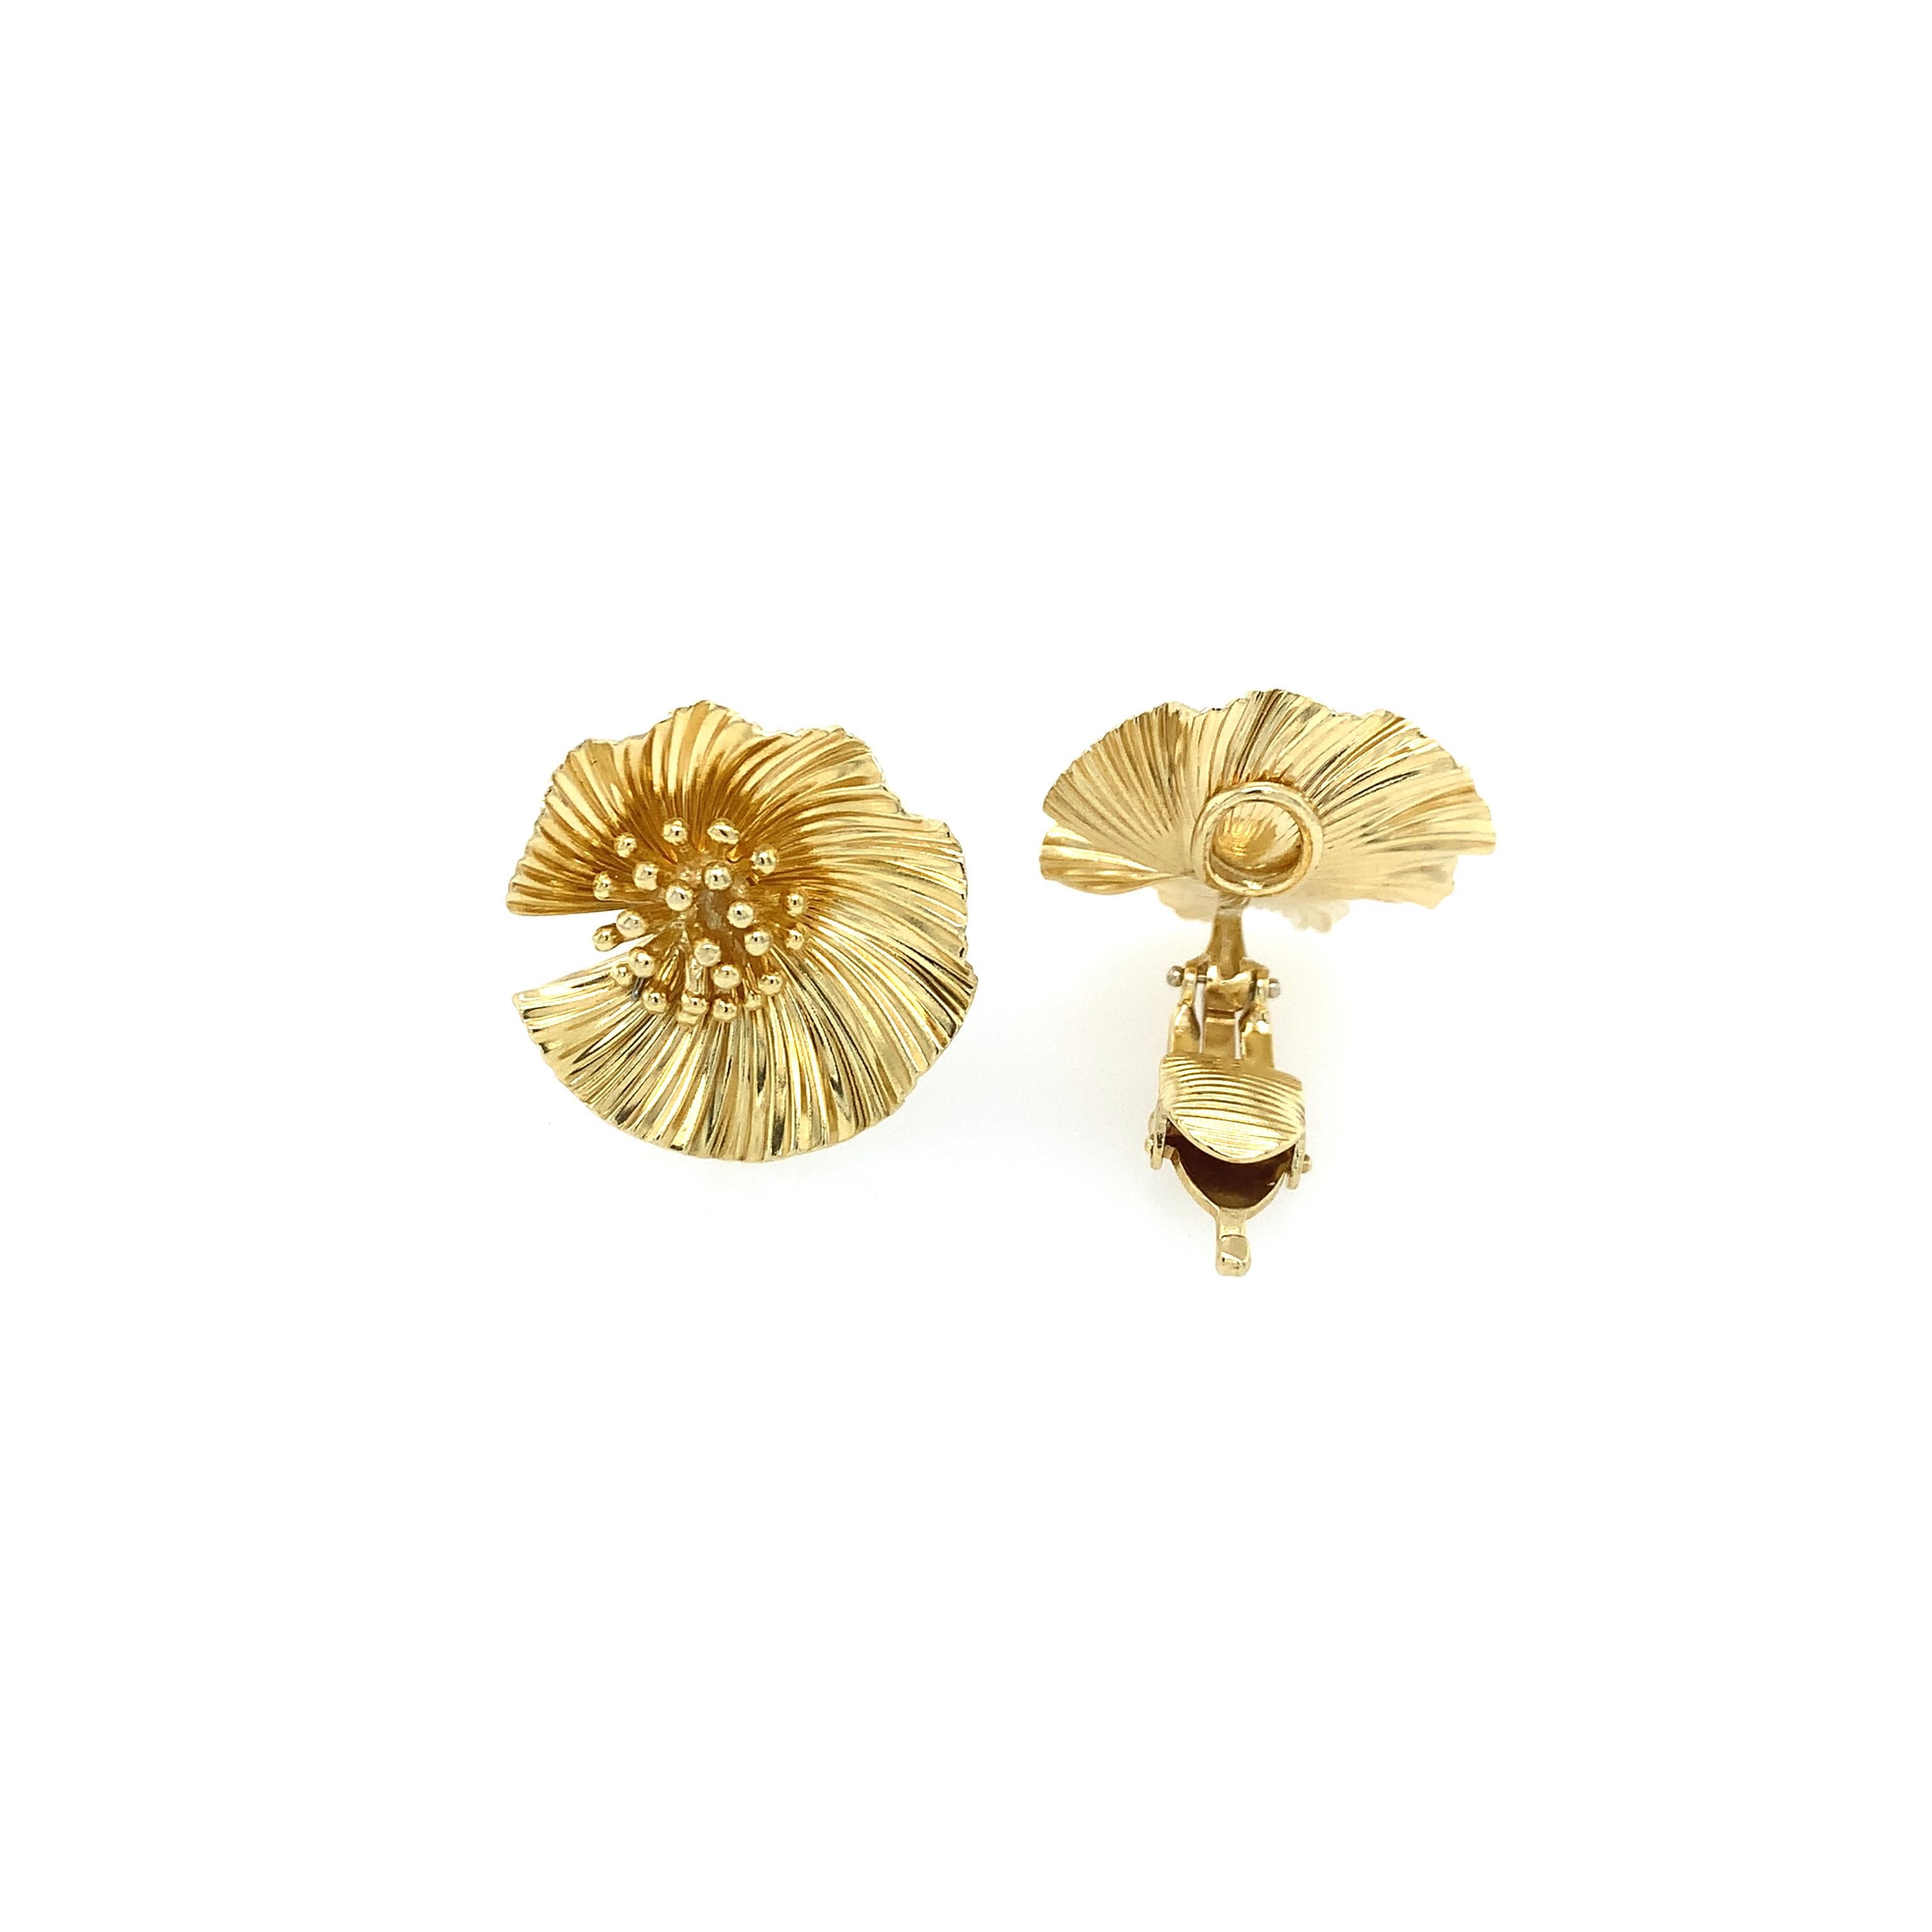 An iconic pair of 14K yellow gold earrings designed by George Schuler for McTeigue (Performed Parts). The prominent ruffled flowers are delicate in design, yet eye-catching with a textured life-like look. They feature comfortable clip backs which